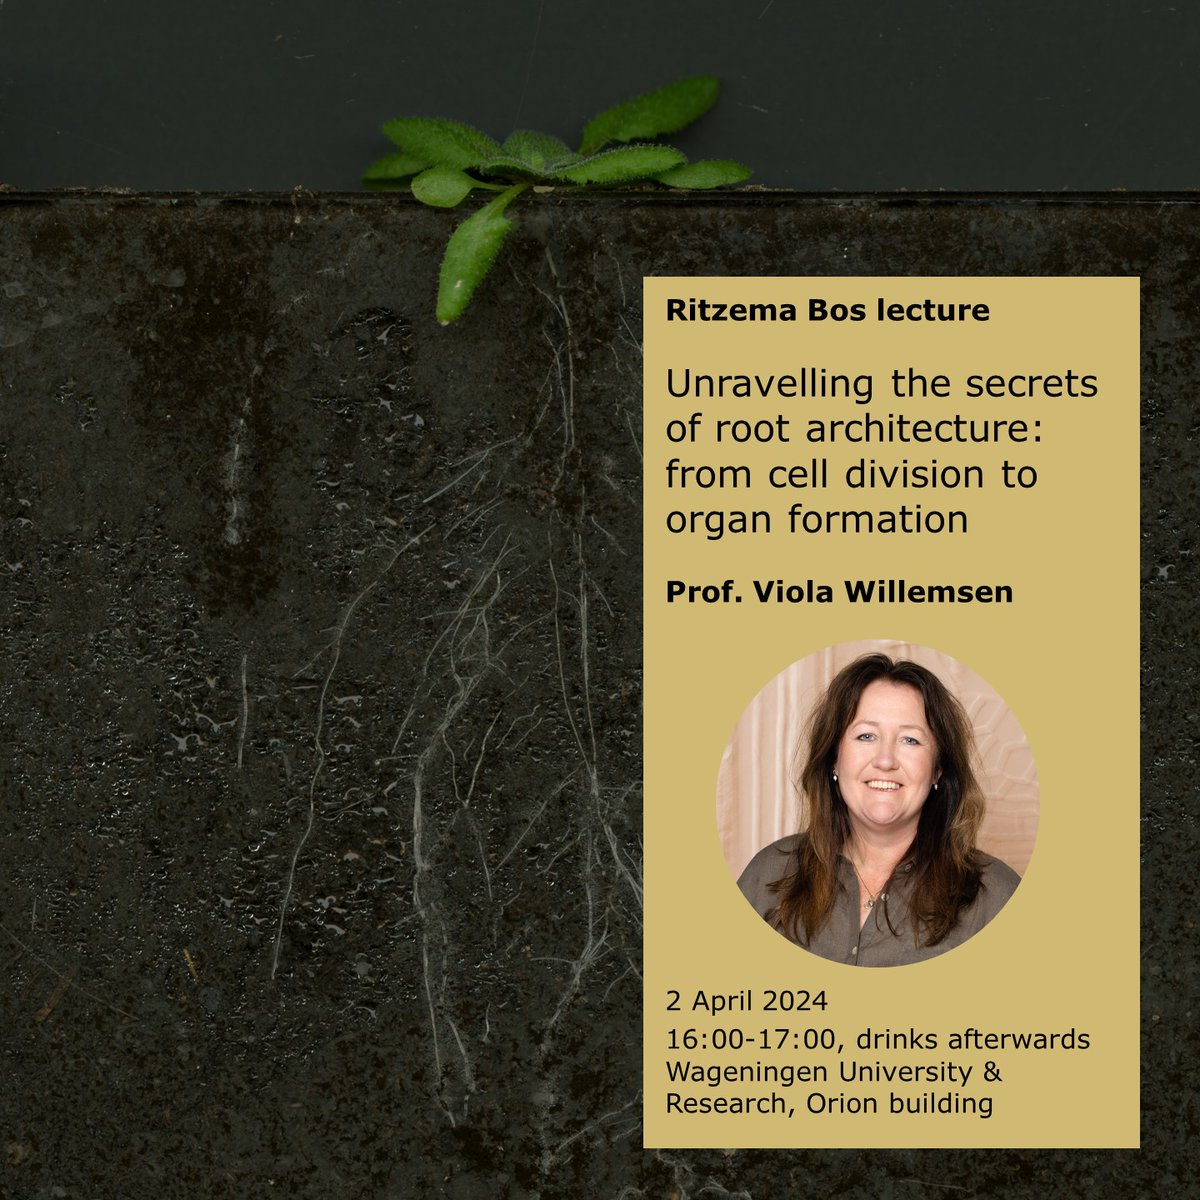 🌱 The @RitzemaBos lectures are back! @ViolaWillemsen, professor at the Laboratory of Cell and Developmental Biology, will kick off with a lecture on Unravelling the secrets of root architecture: from cell division to organ formation. Register here 👉 ritzemaboslectures.com